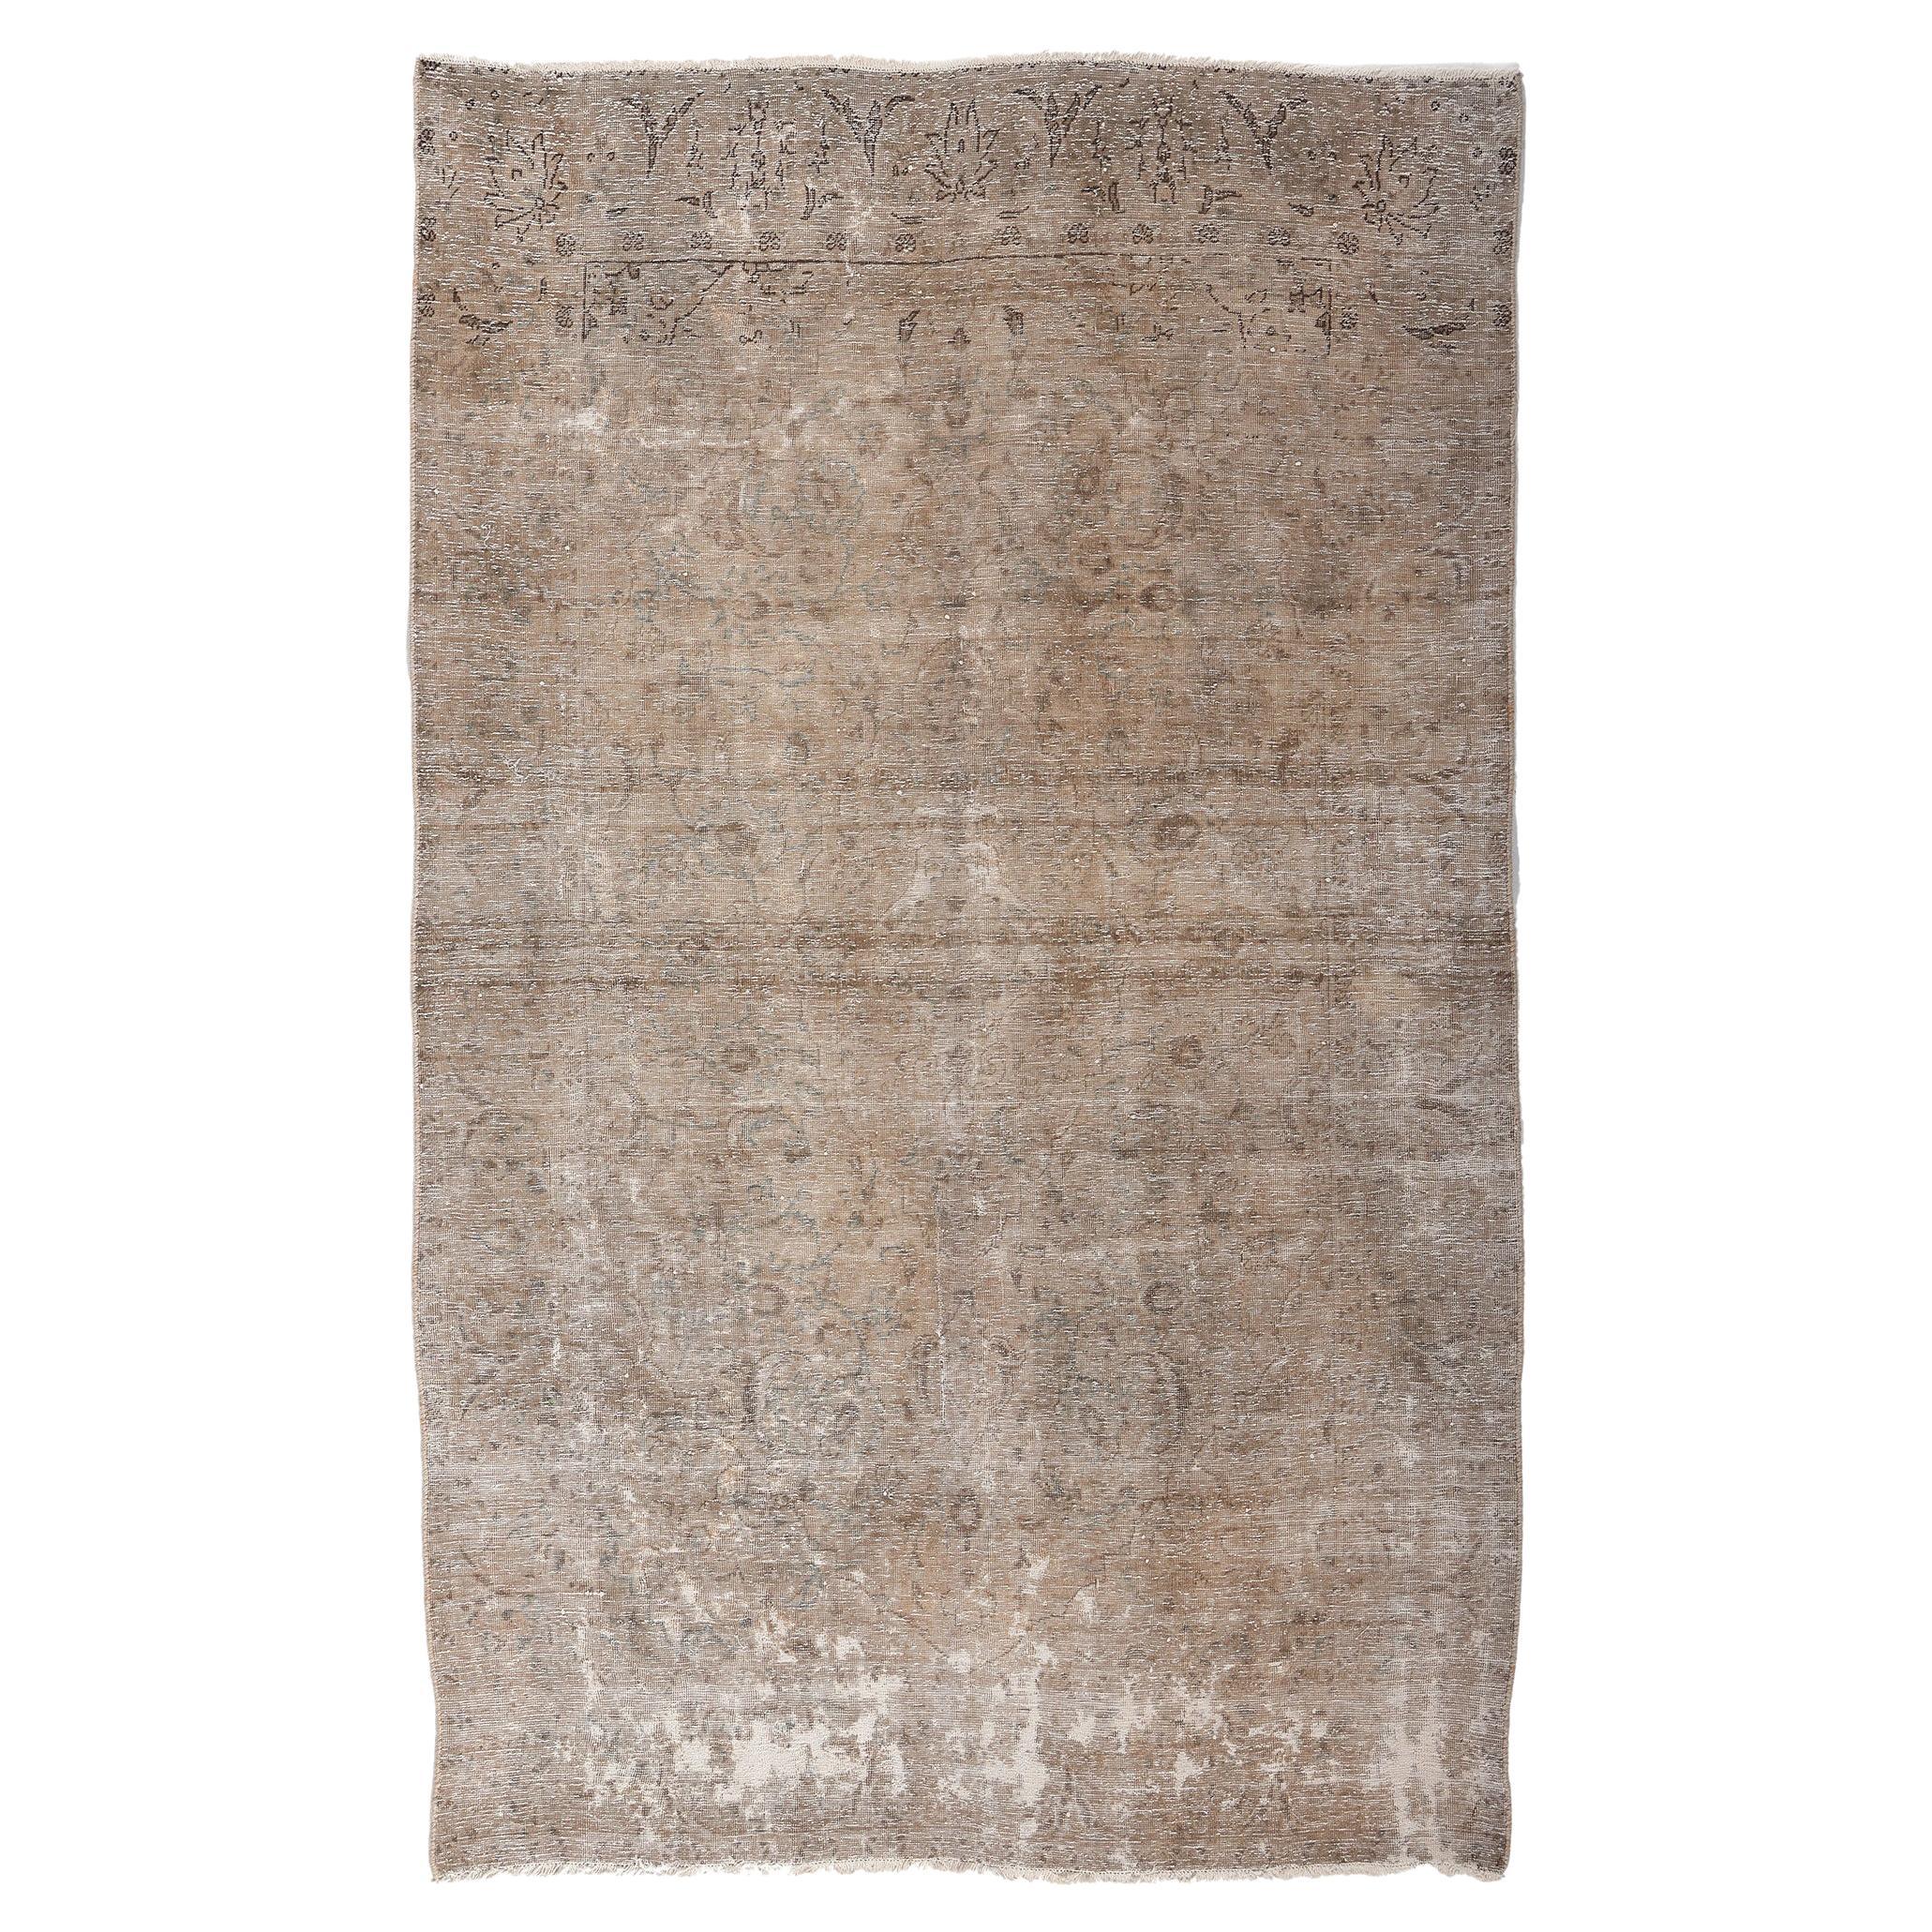 Distressed Faded Vintage Persian Rug, Industrial Luxe Meets Earth-Tone Elegance